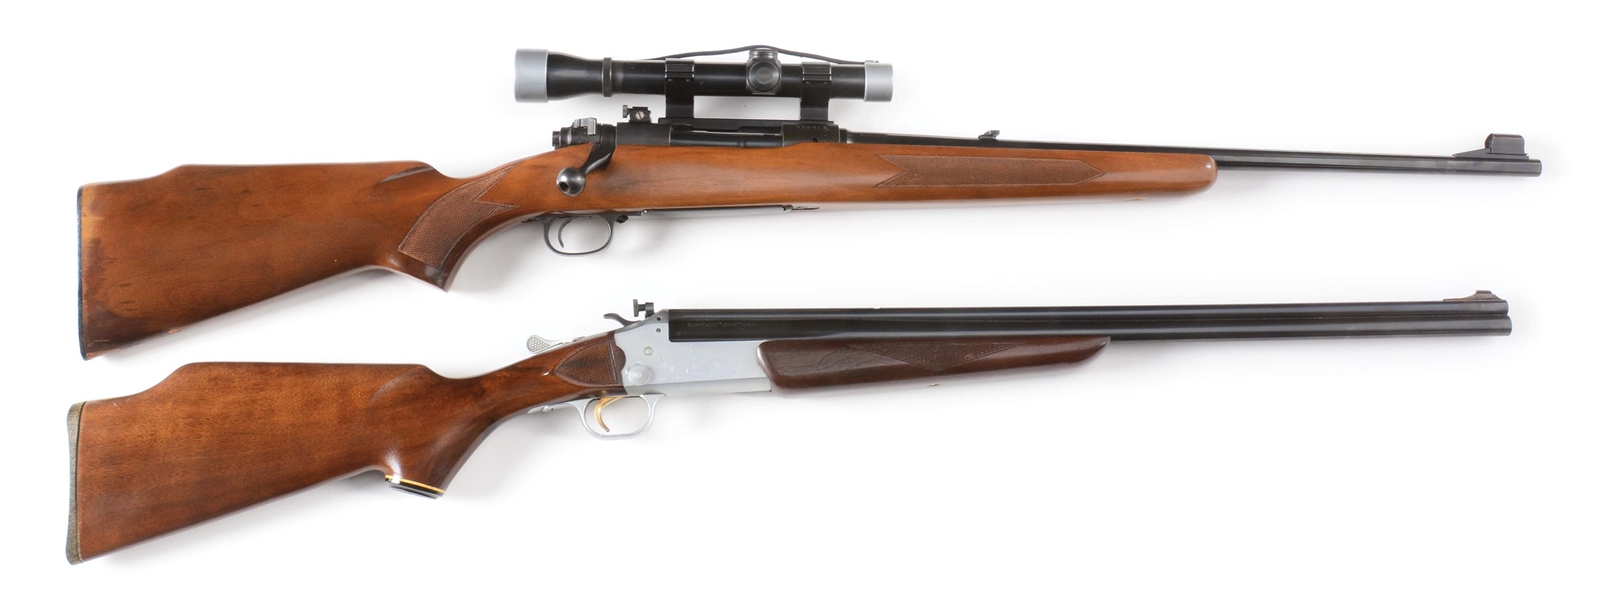 (M+C) PRE-64 WINCHESTER MODEL 70 FEATHERWEIGHT BOLT ACTION RIFLE AND SAVAGE MODEL 24 RIFLE-SHOTGUN.